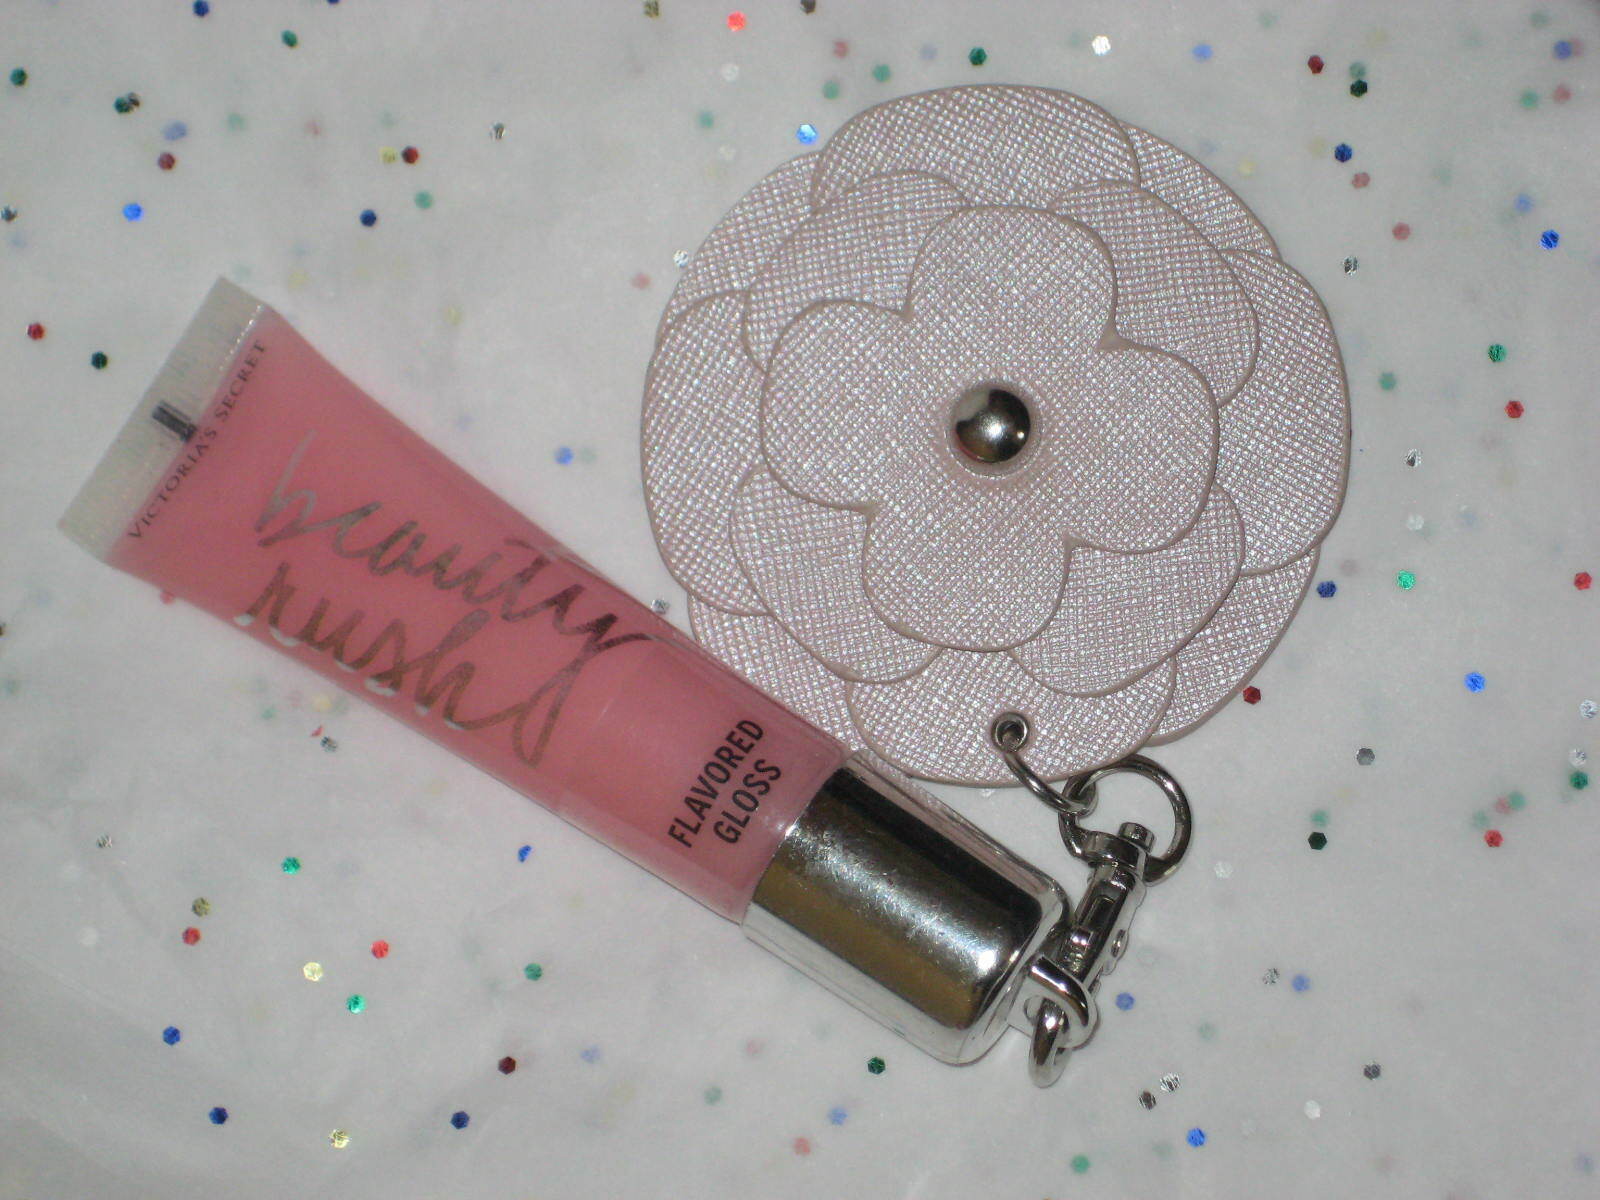 Victoria's Secret Beauty Rush Lip Gloss in Candy, Baby with Keychain Charm